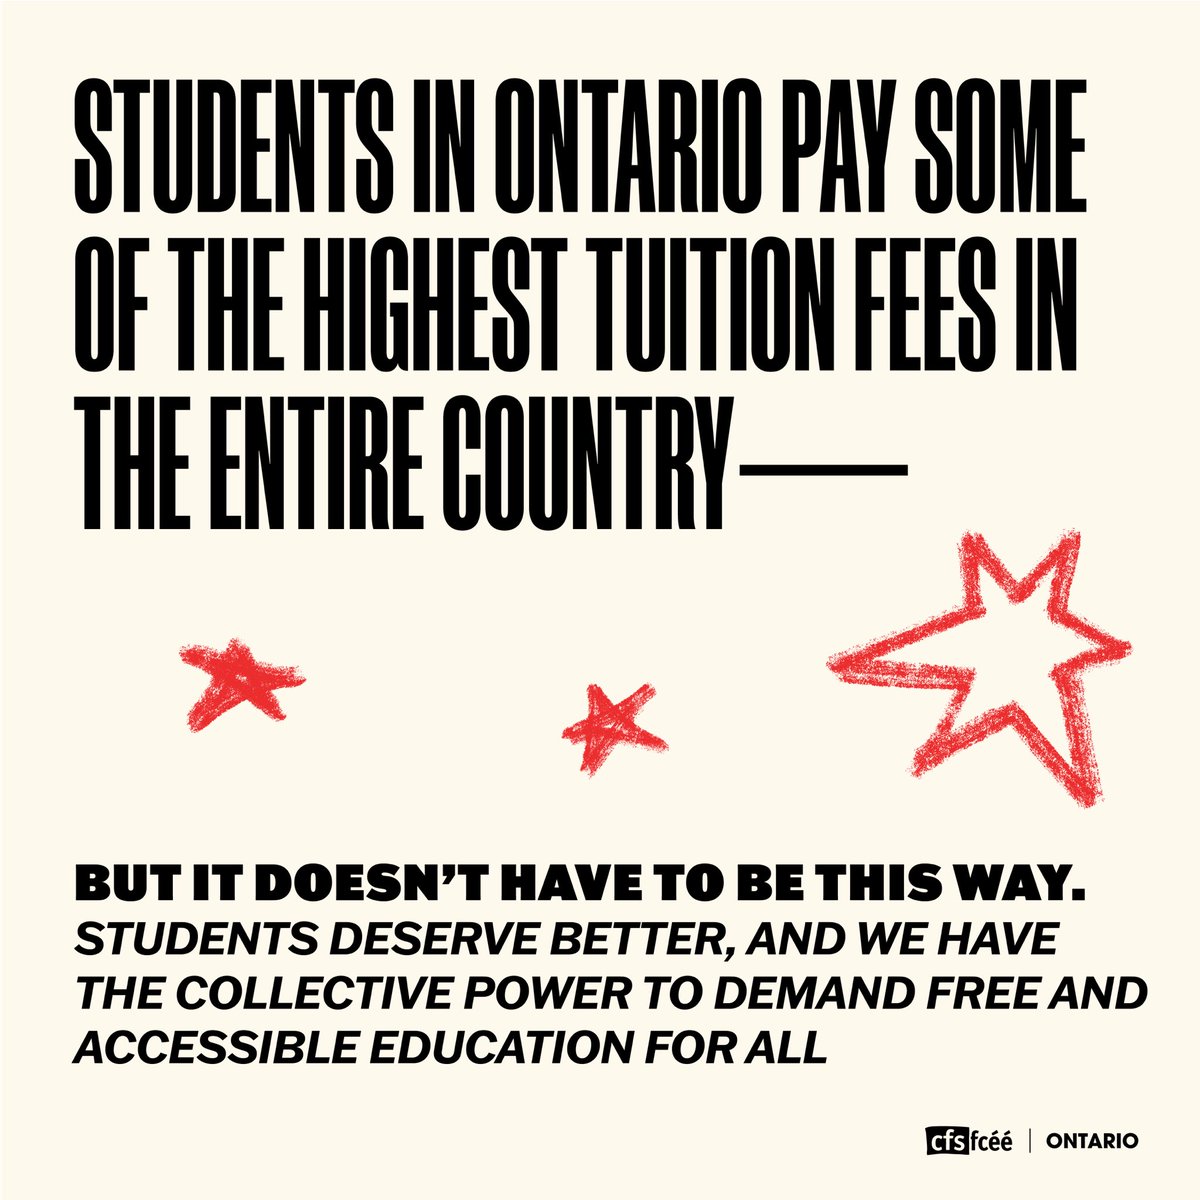 The provincial government and our administrations want us to believe that Free Education isn’t achievable, but we know that it is! When students are united, we win. On November 8th, we’re going ALL OUT for Free and Accessible Education. #AllOutNov8 #FightTheFees #FreeEducationNow